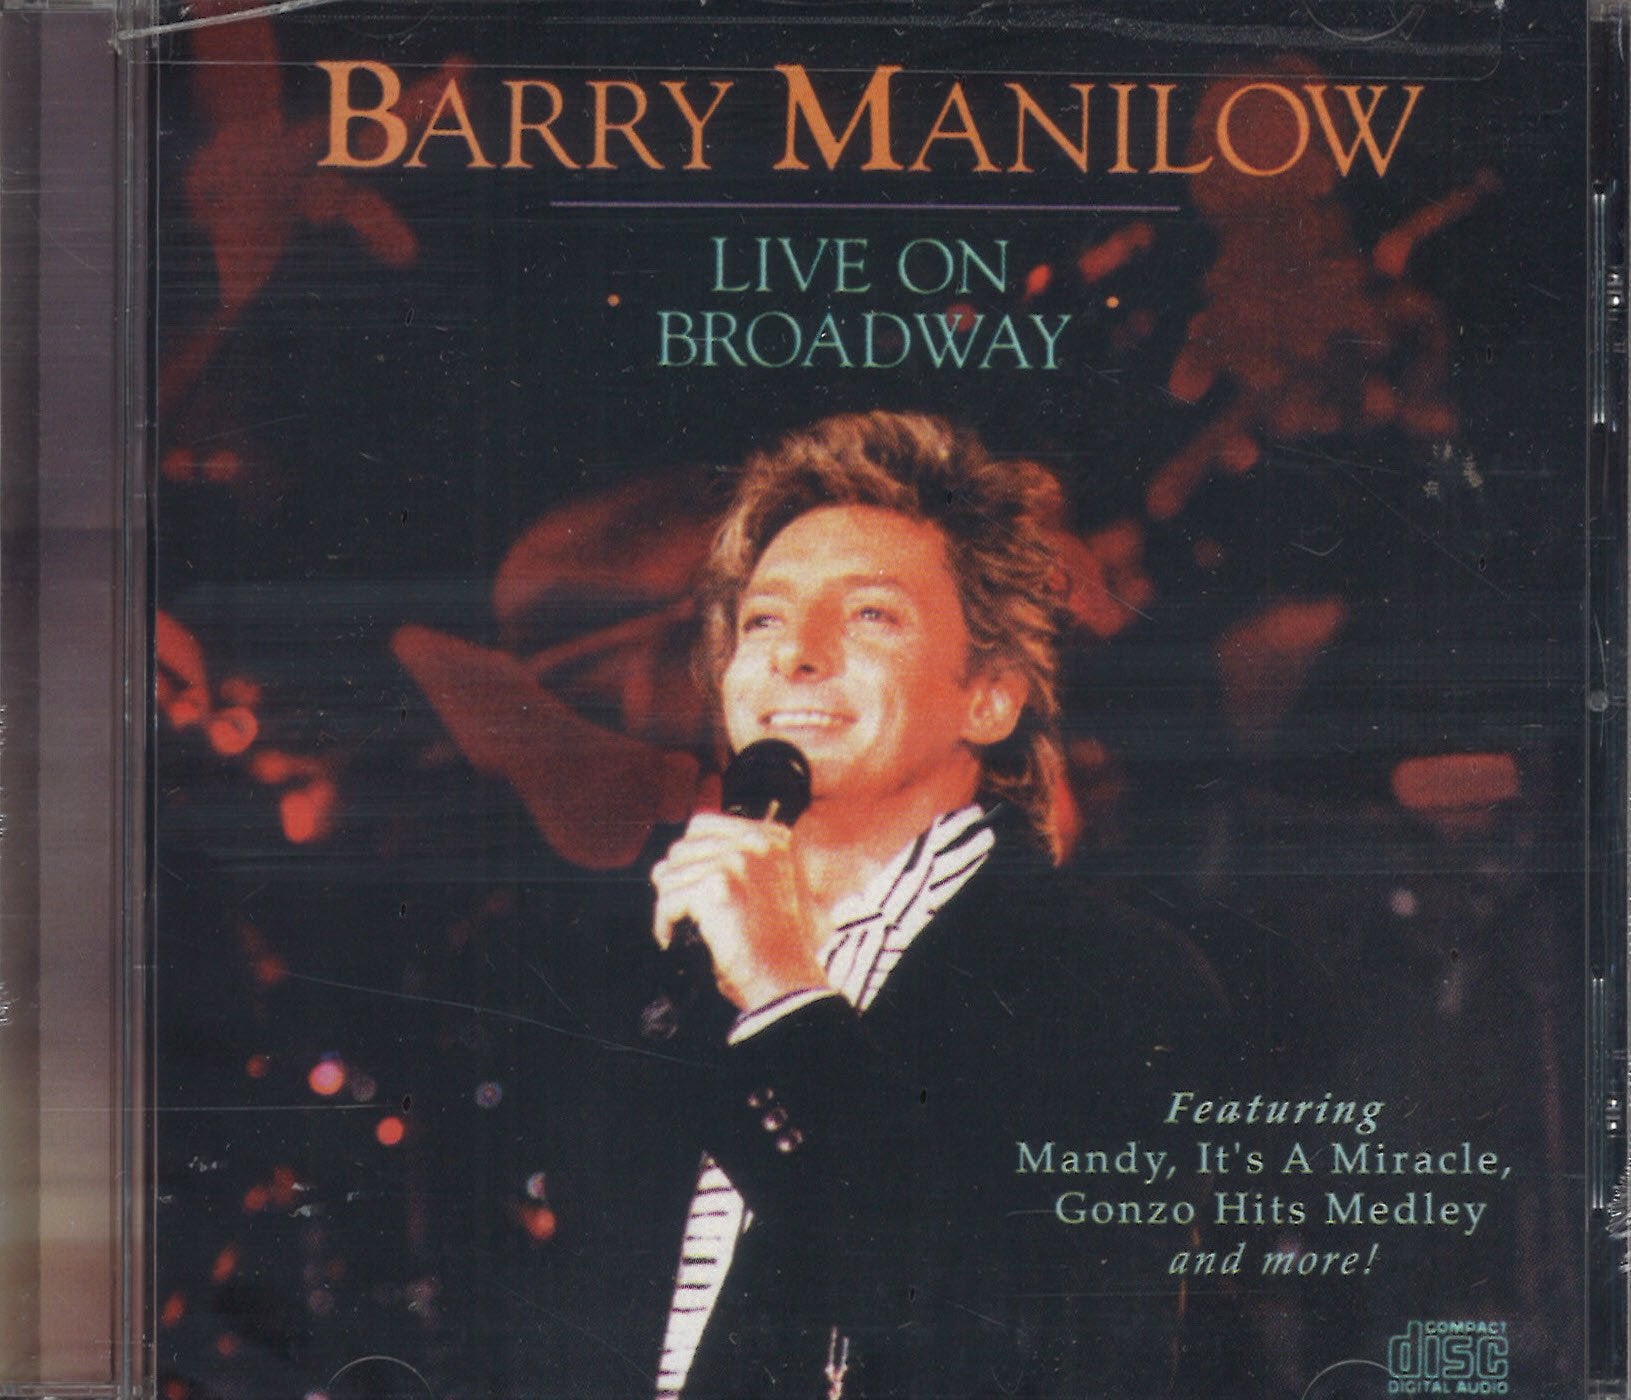 Barry Manilow Live On Broadway